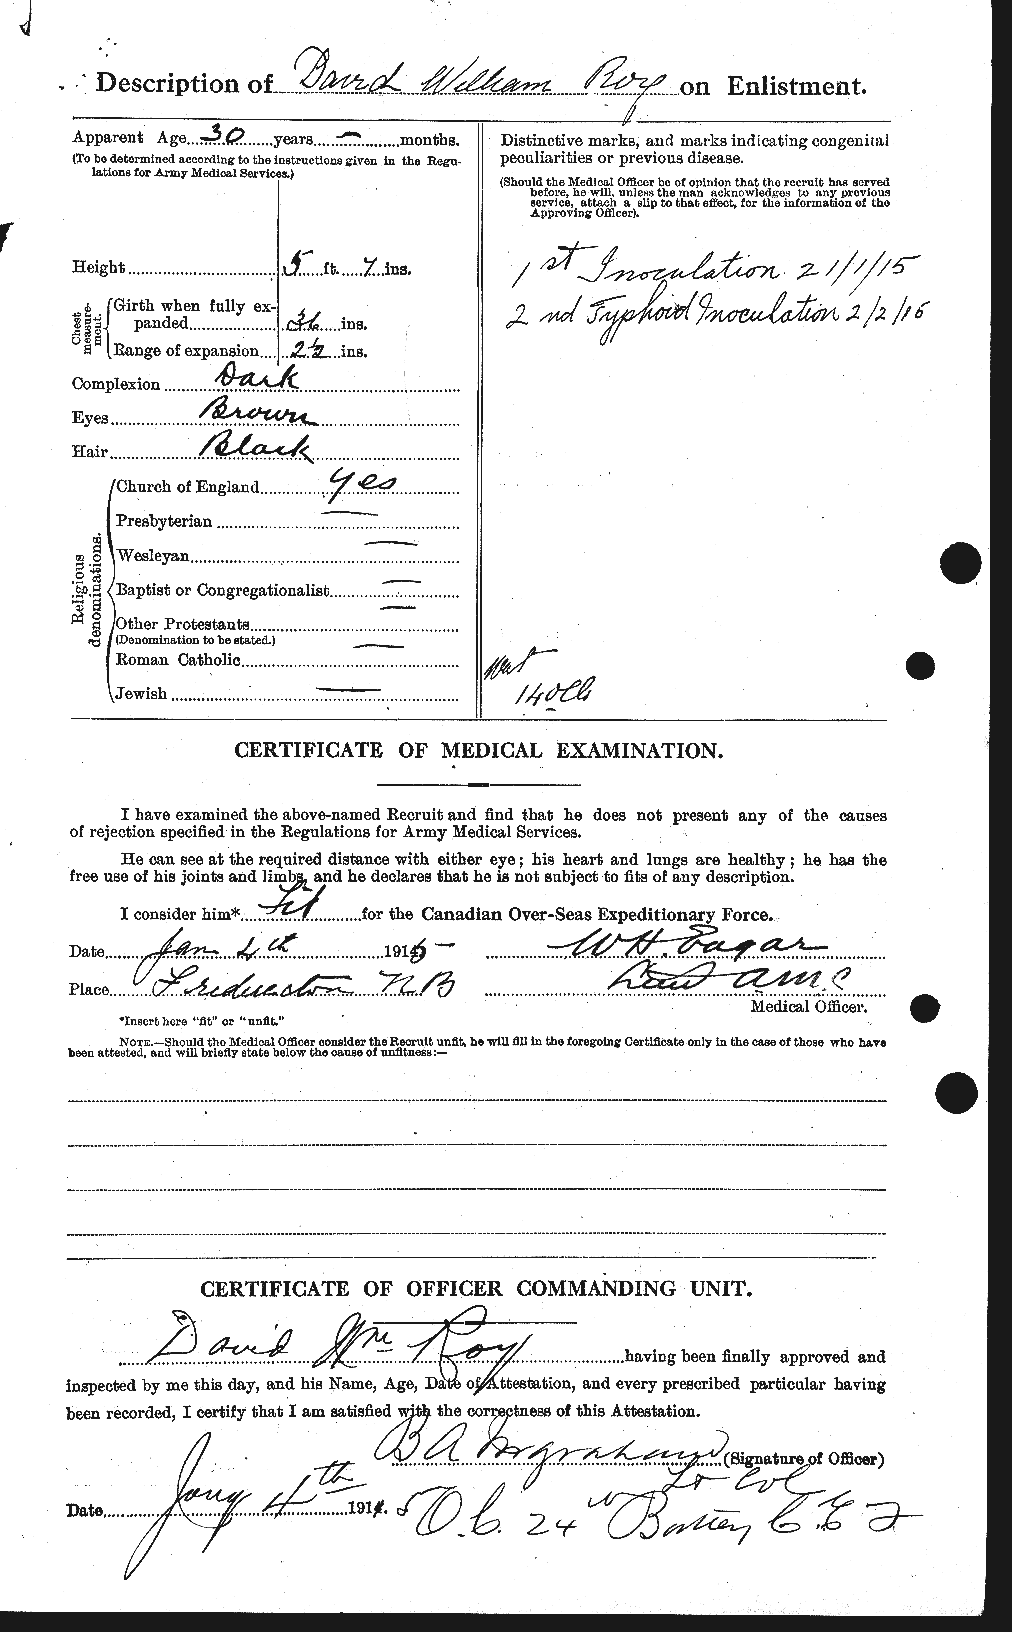 Personnel Records of the First World War - CEF 615724b